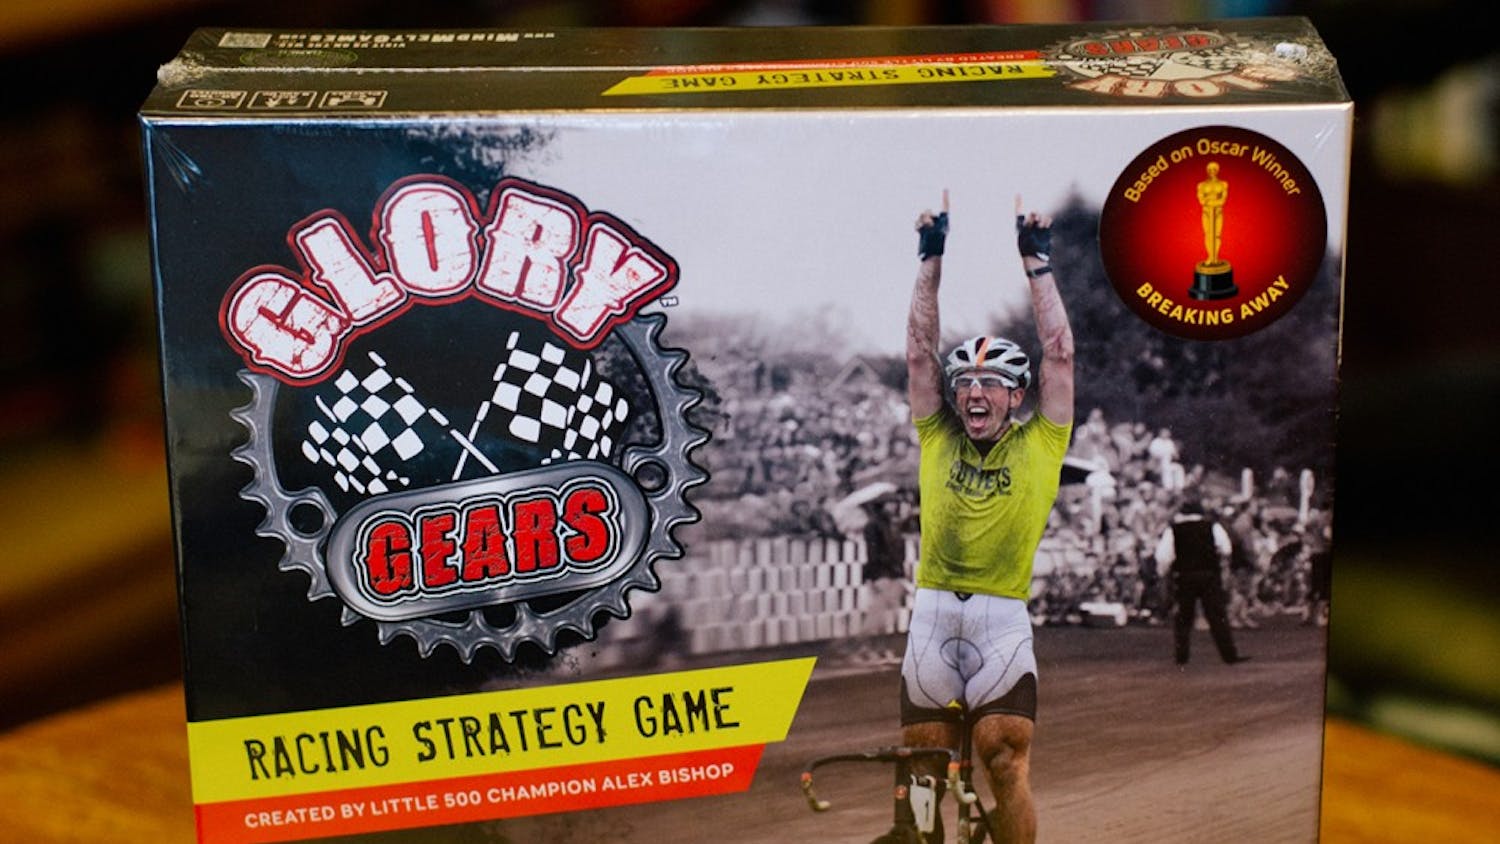 IU alumnus and former Little 500 champion Alex Bishop's board game Glory Gears. &nbsp;The game will be sold by more than 40 retailers around the country before this year's race.